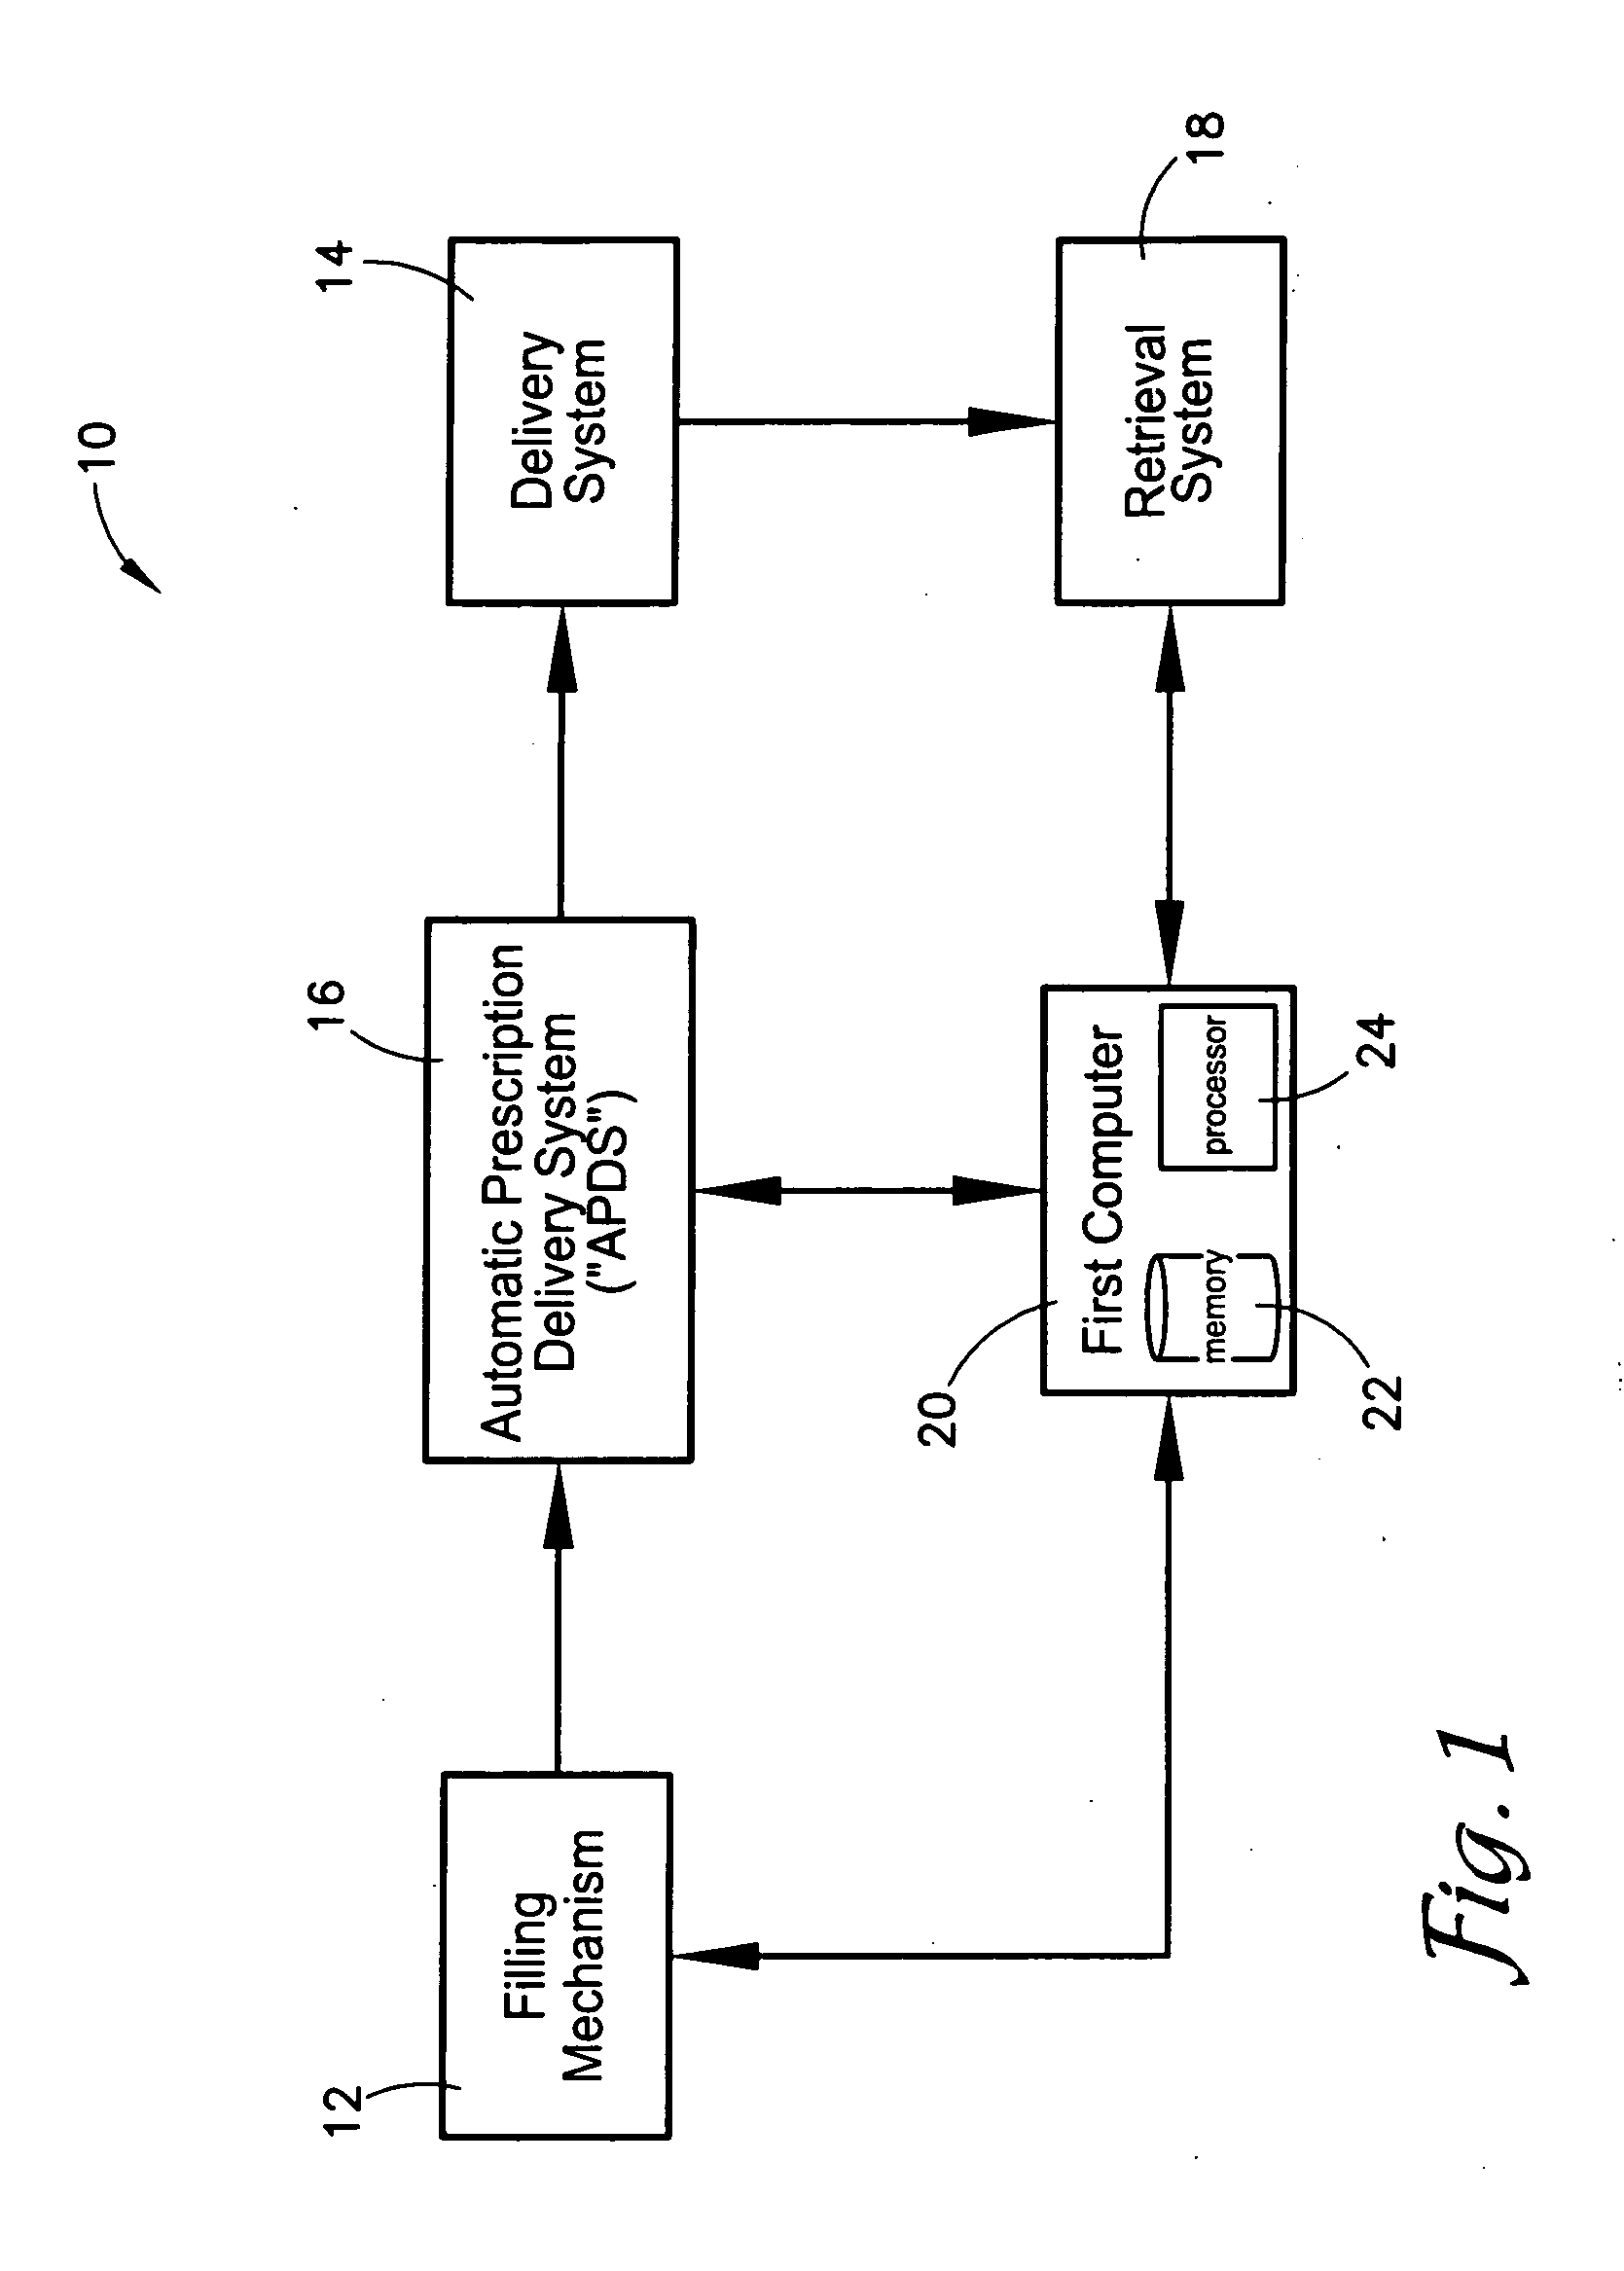 Method and system for delivering prescriptions to remote locations for patient retrieval